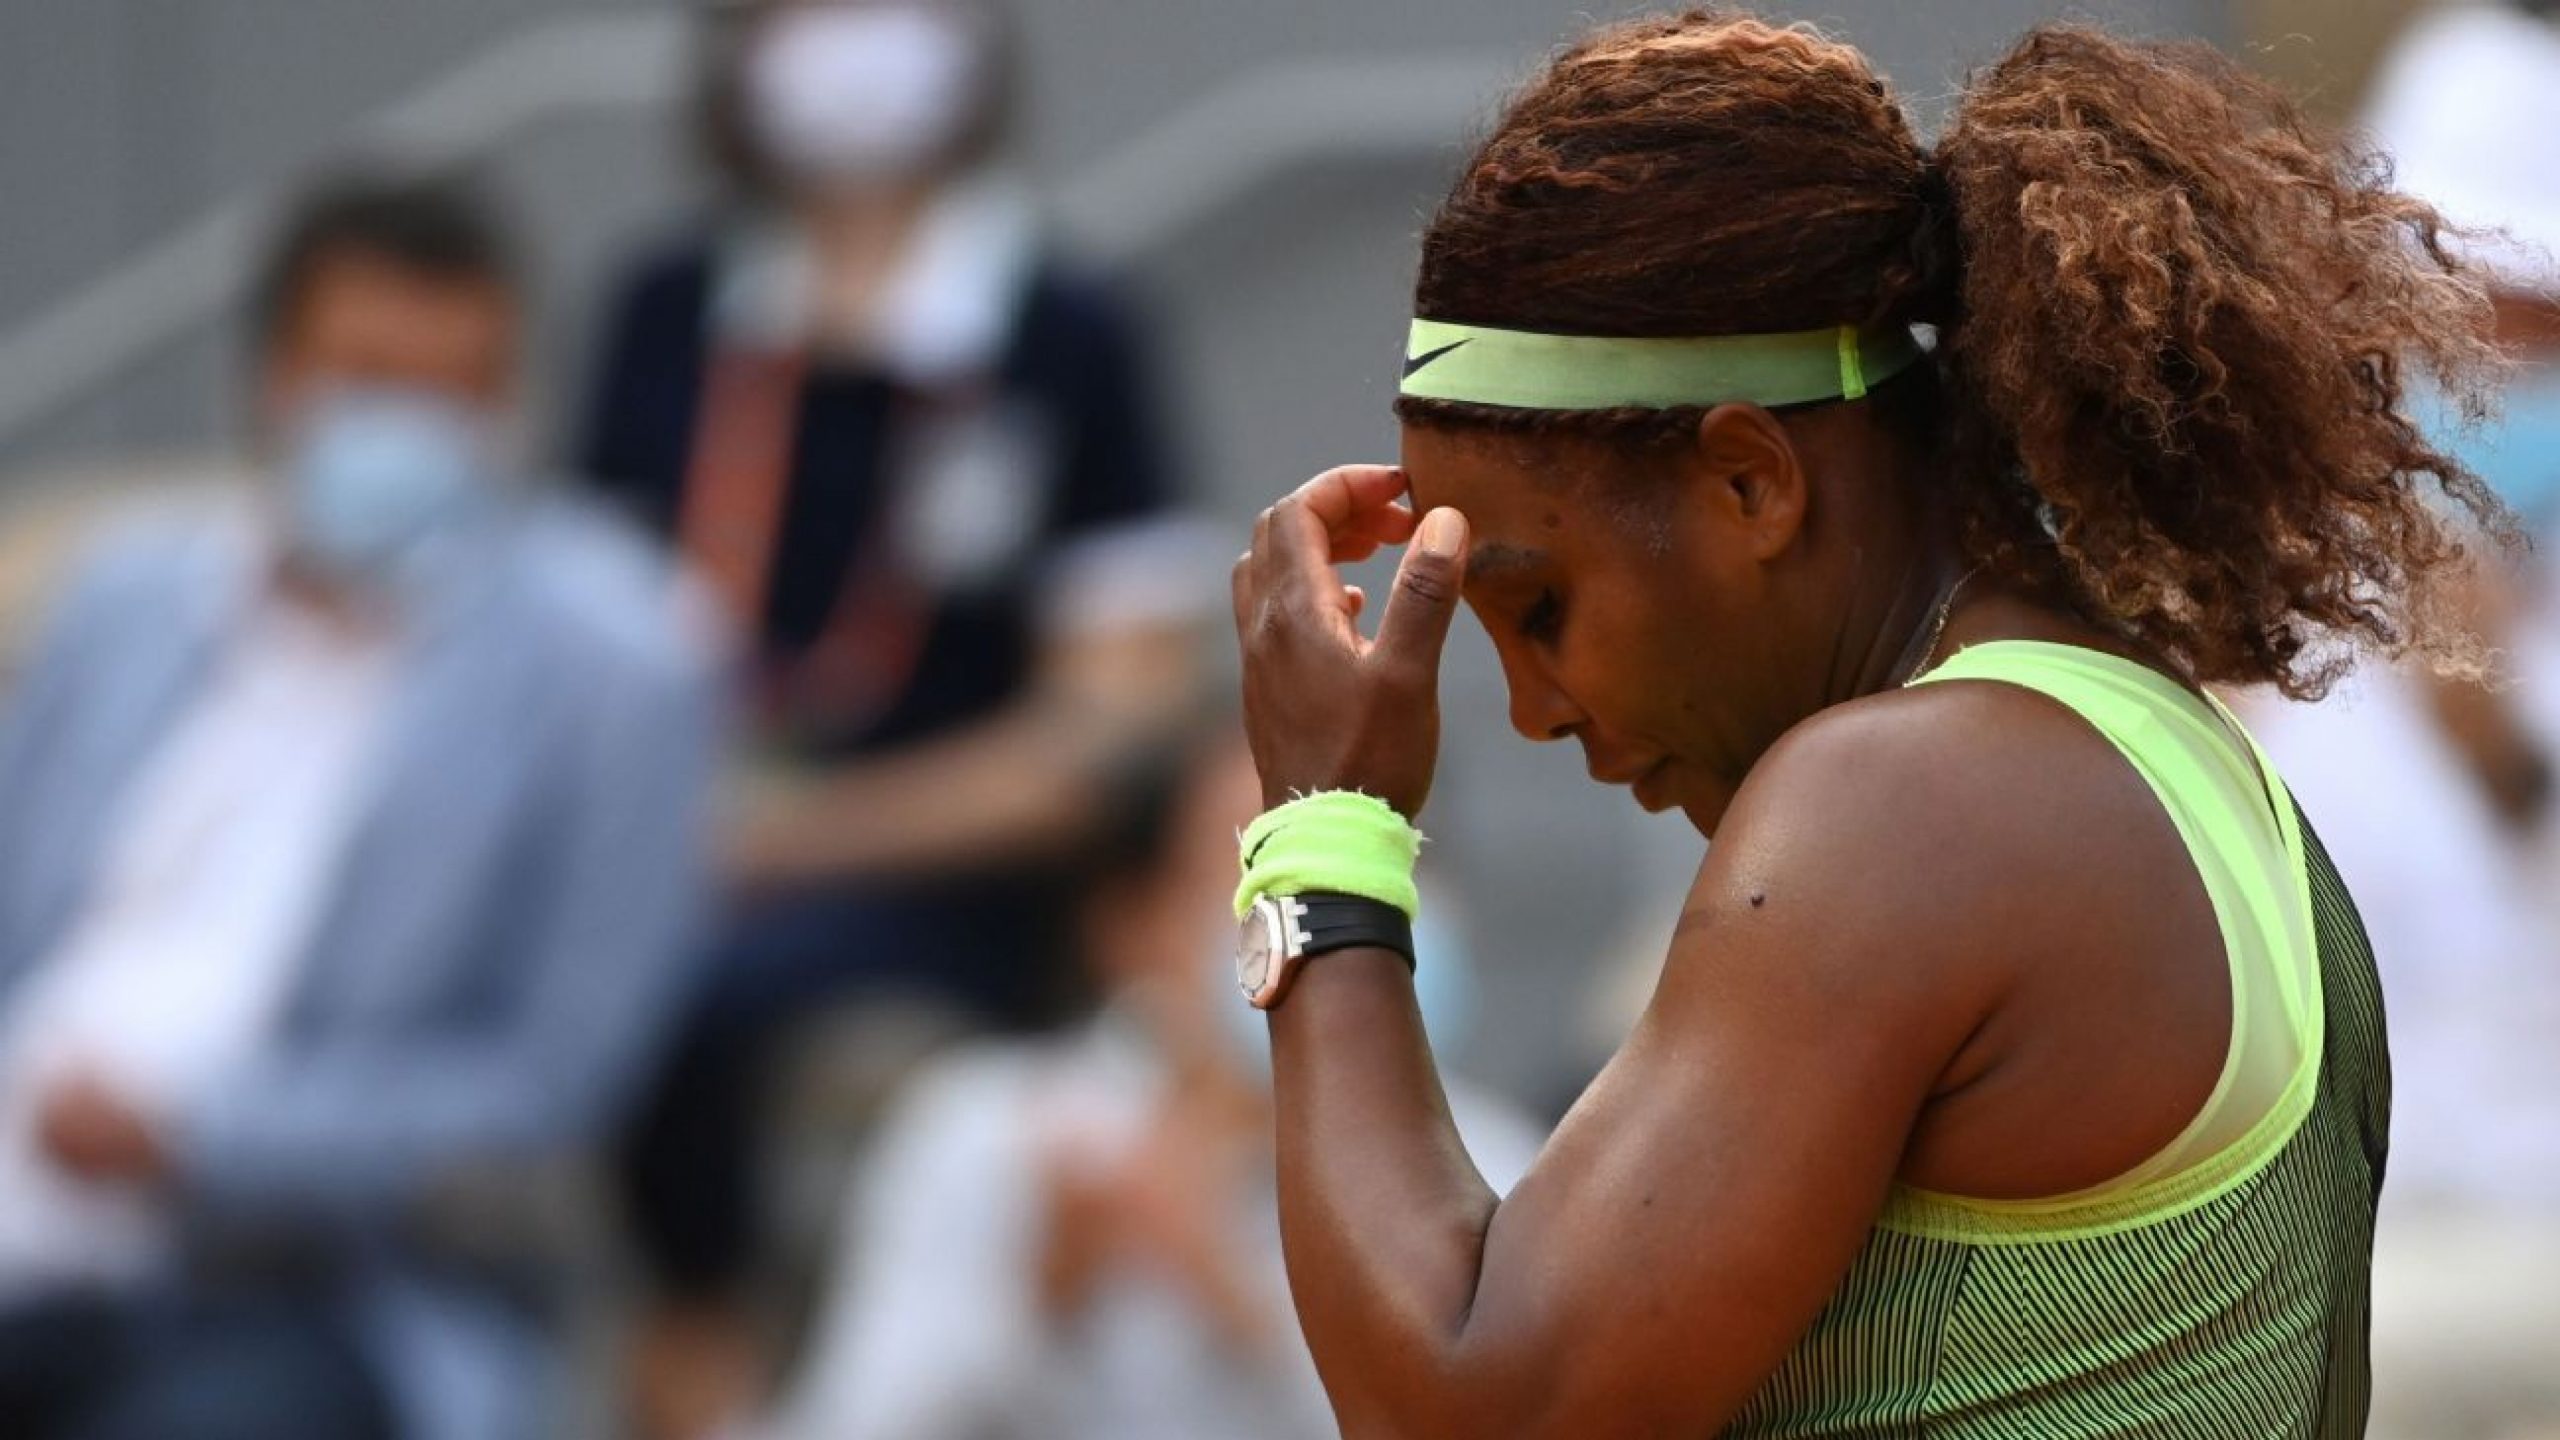 After Paris exit, Wimbledon now looms large for Serena Williams